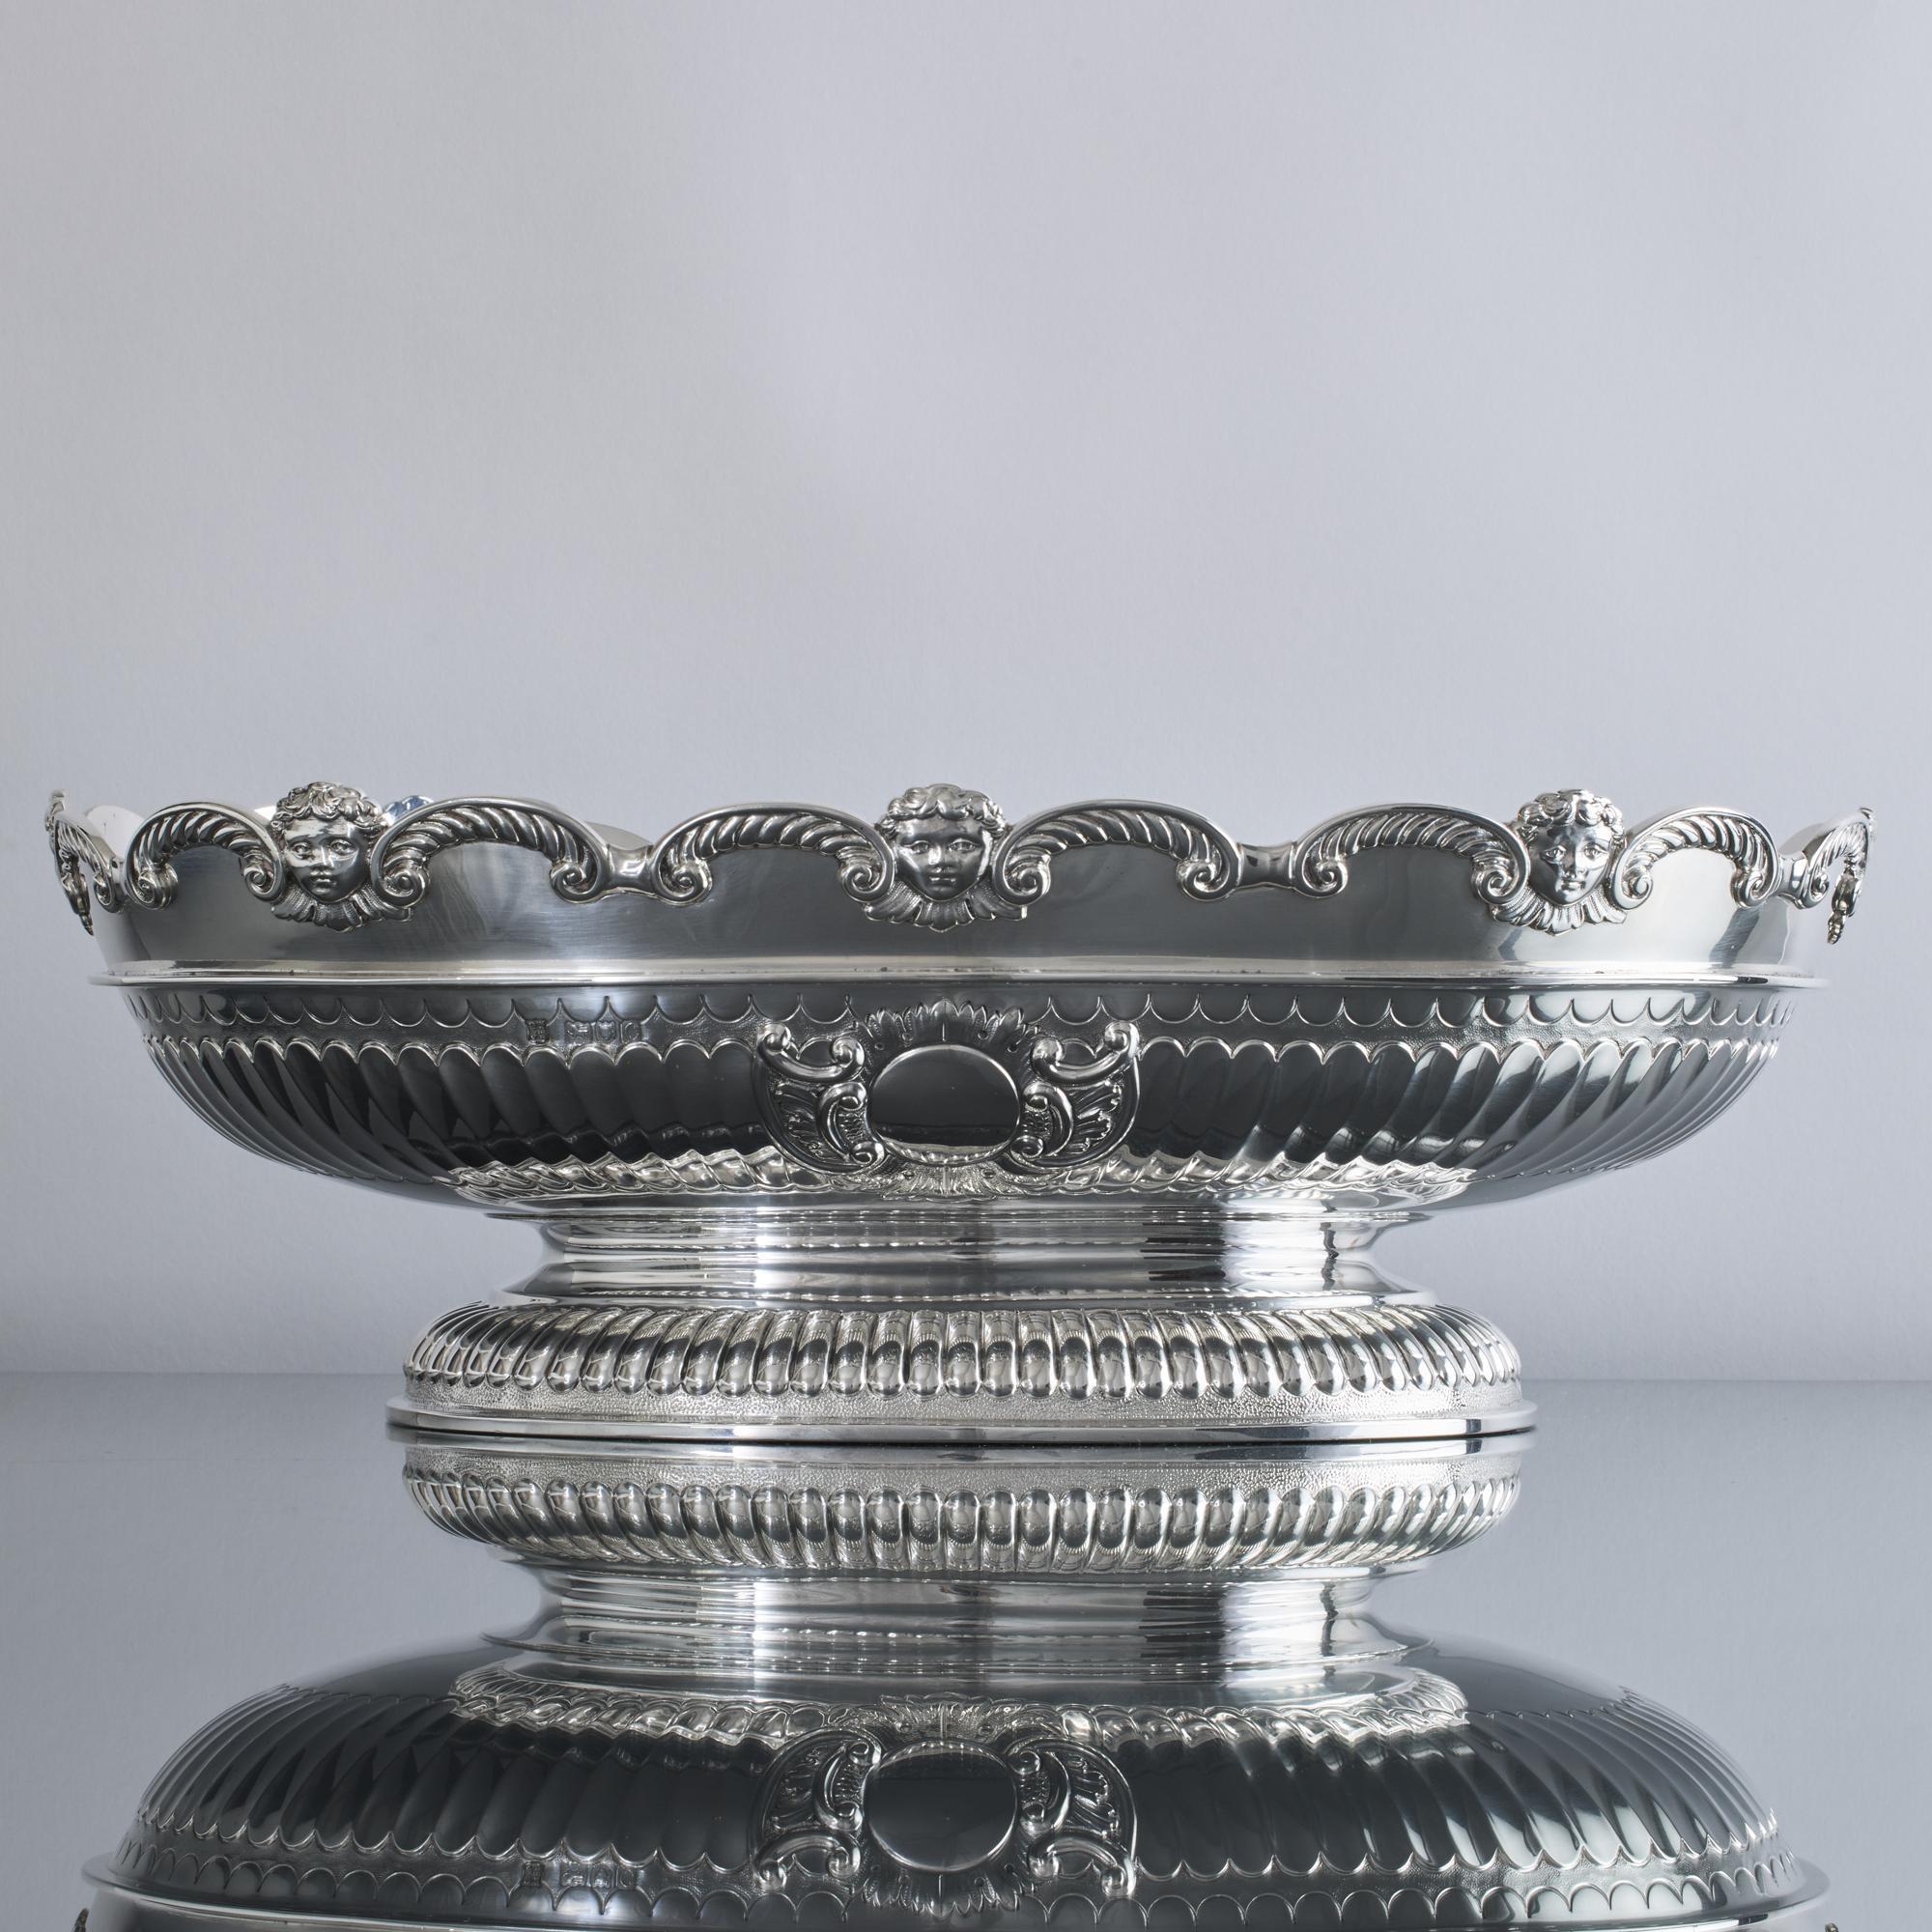 Superior quality oval-shaped silver fruit bowl, with a Monteith-style rim decorated with cast and applied scrolled gadroon patterns and cherub masks. The body and base are hand chased with fluting and a cartouche on either side. 
 
 This lovely bowl